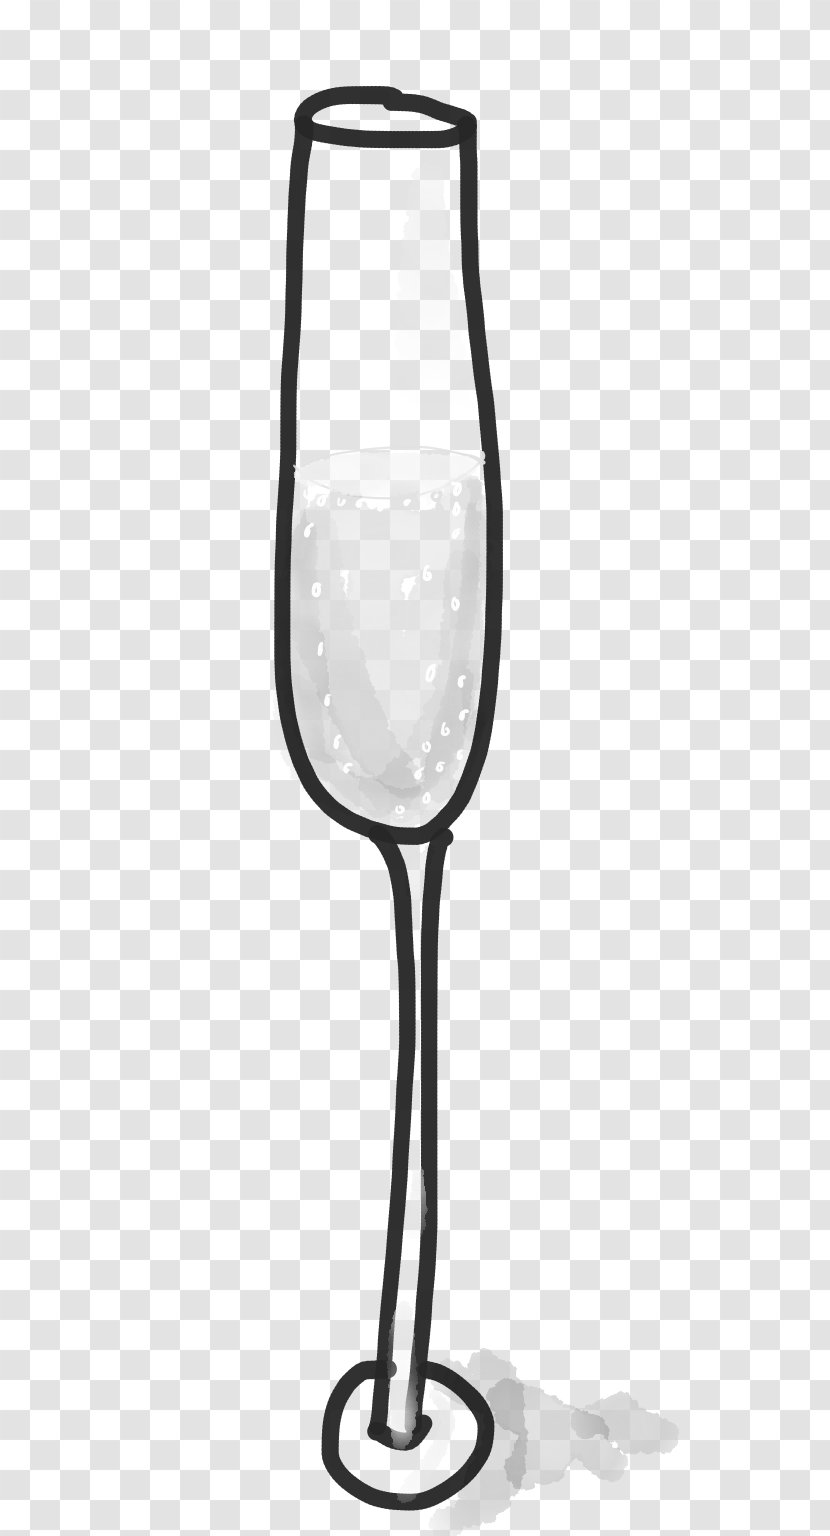 Wine Glass Champagne Product Beer Glasses - Prosecco Symbol Transparent PNG